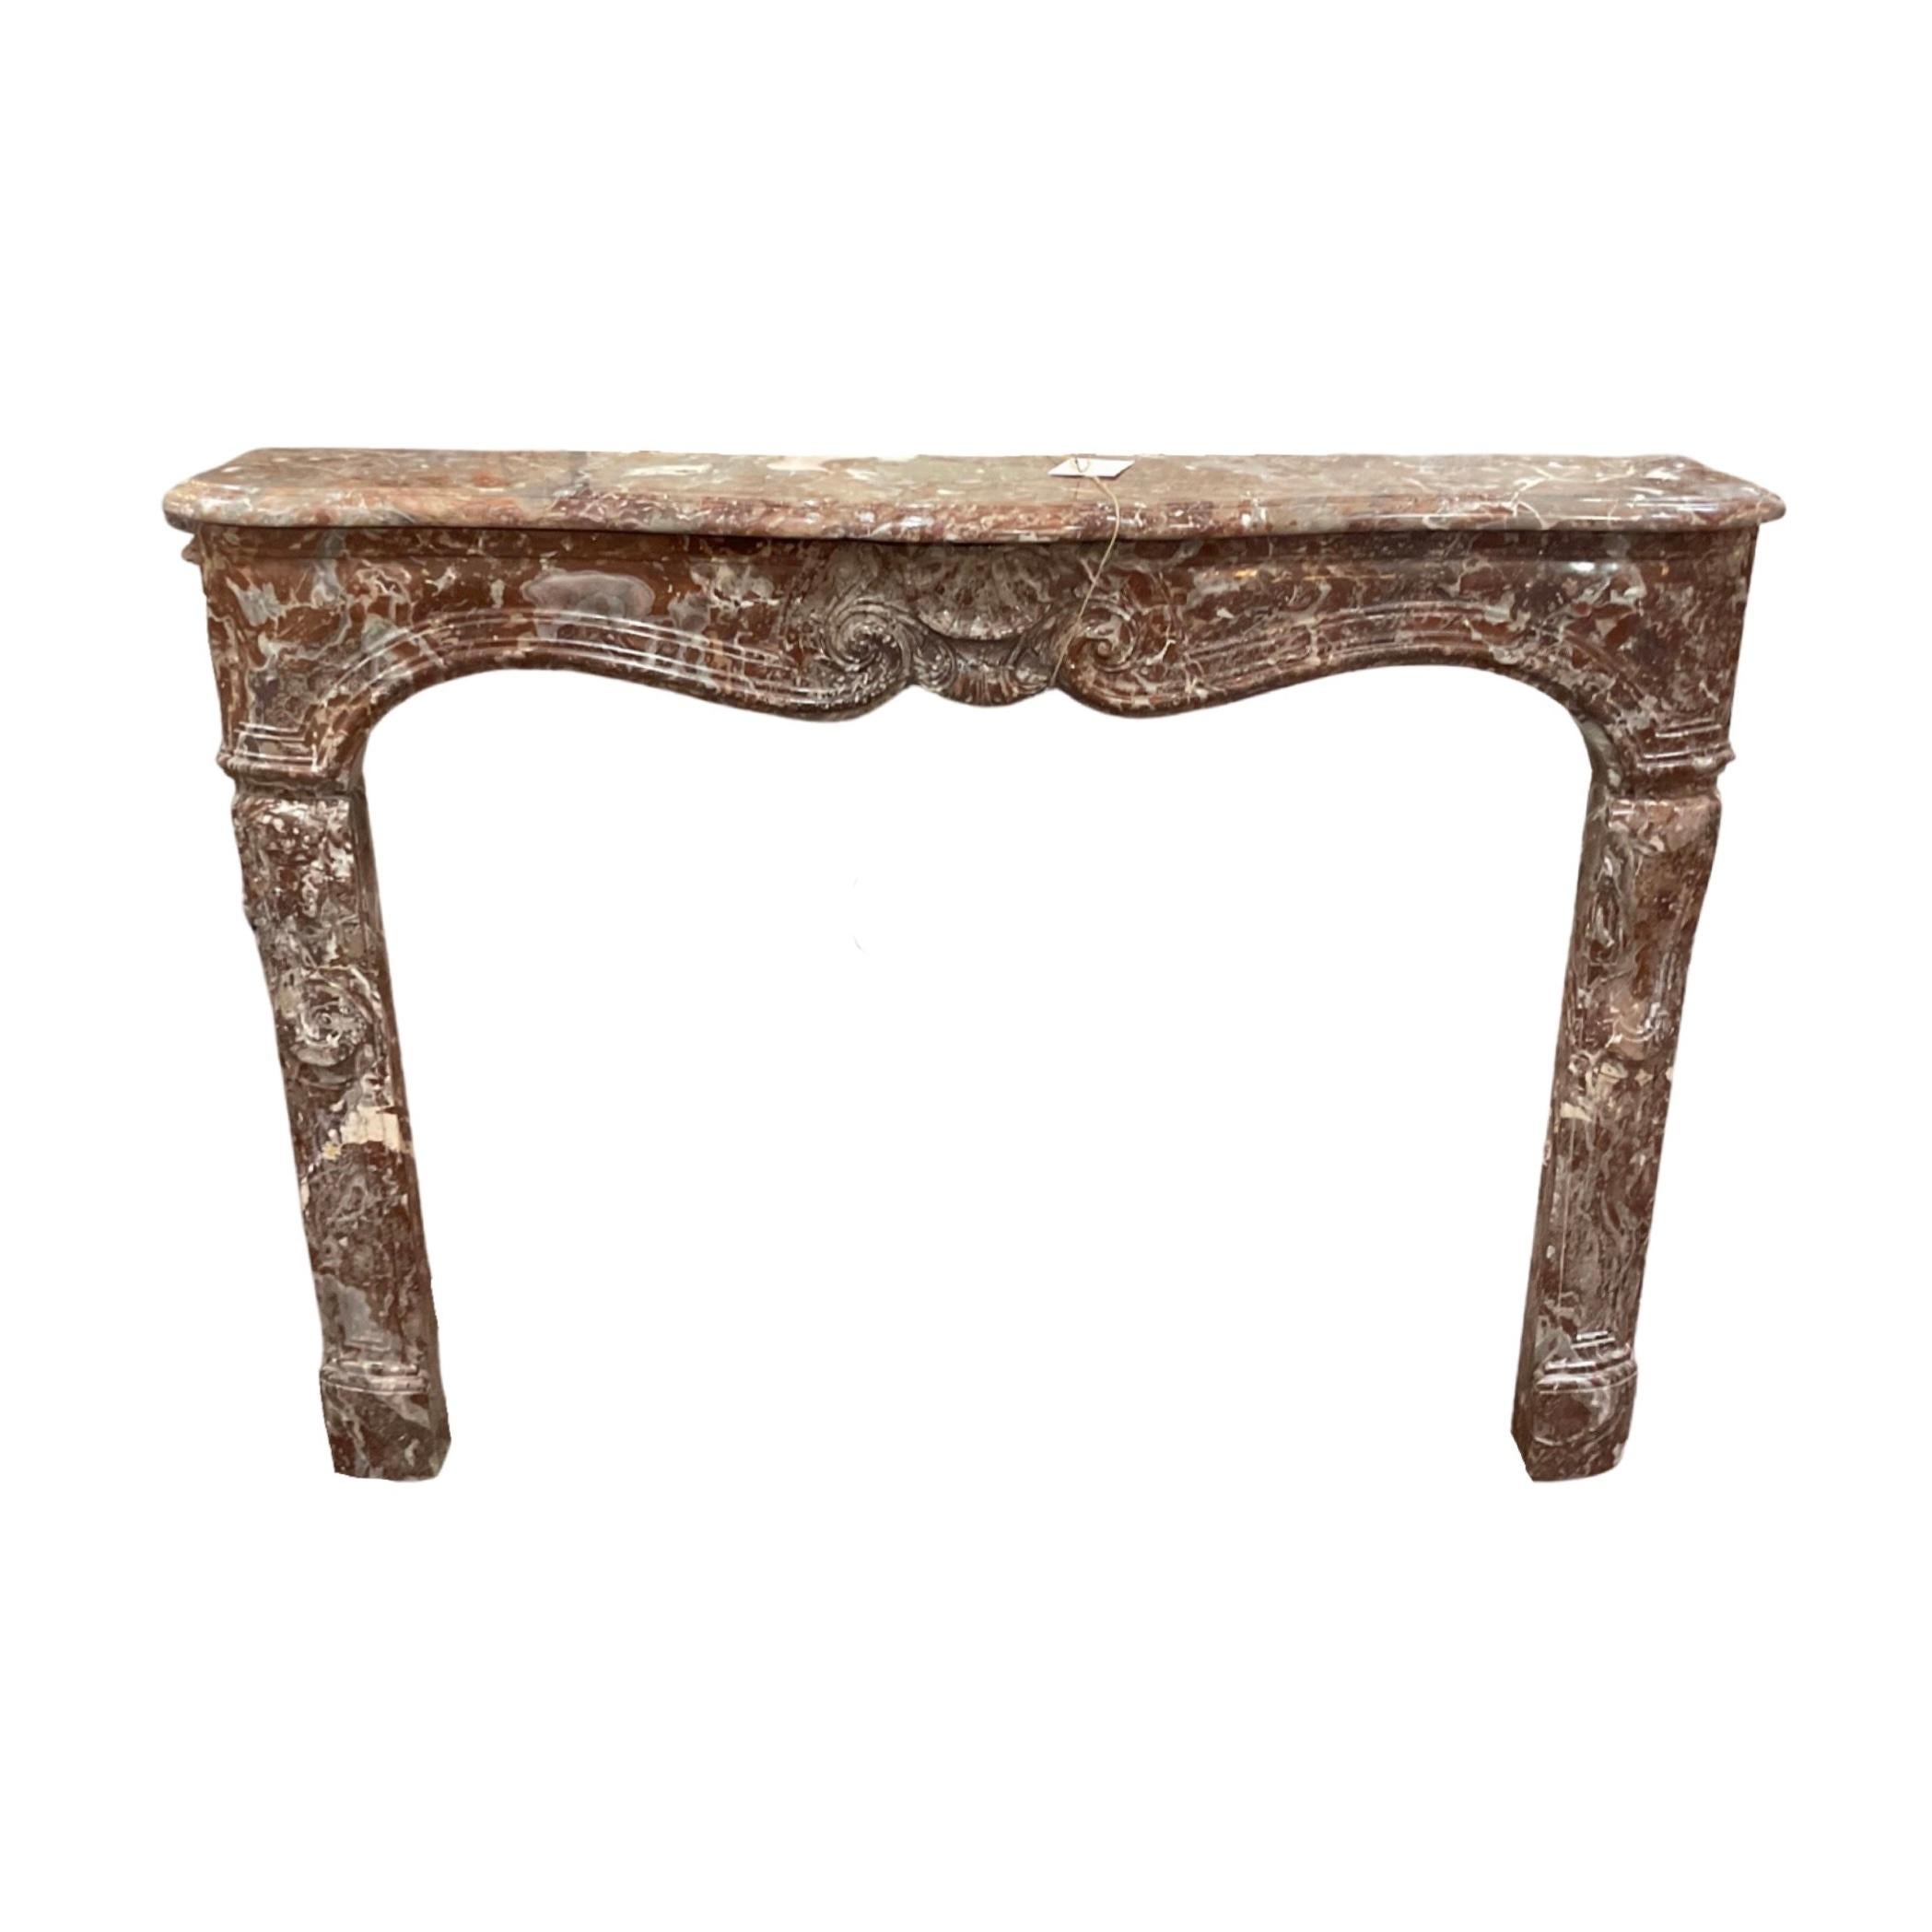 Louis XVI-style mantel. Made out of marble stone. Originates from France. Circa, 1870.